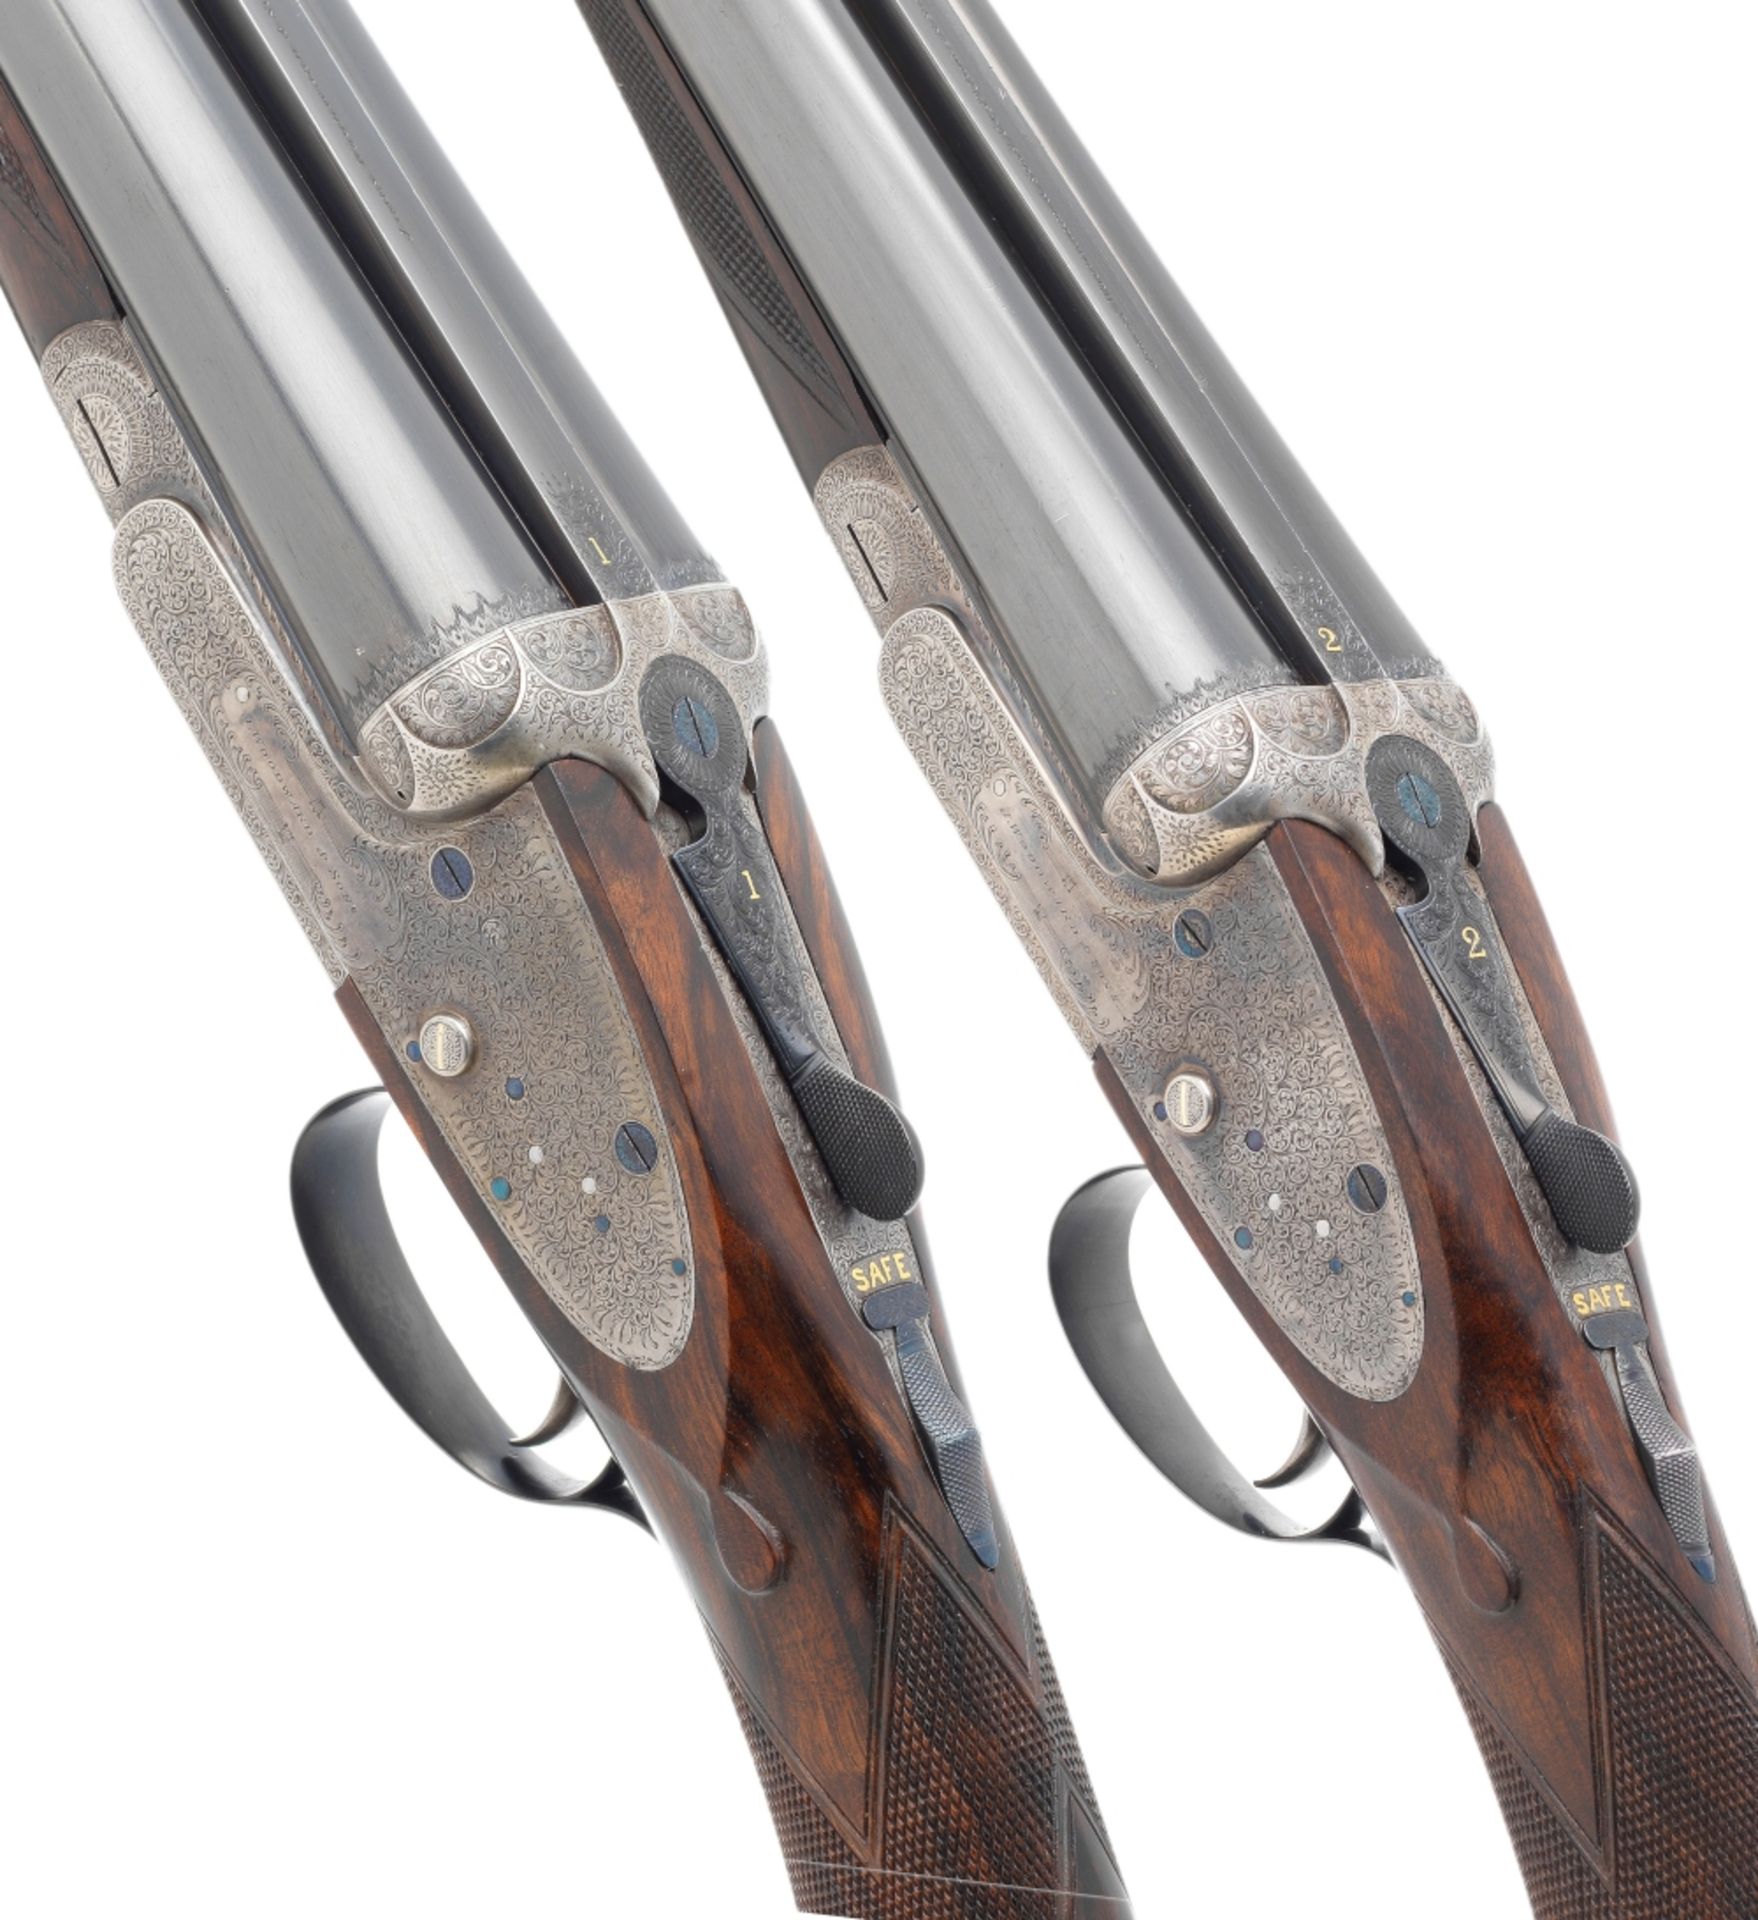 A pair of 12-bore sidelock ejector guns by James Woodward & Co., no. 5451/2 In their brass-mounte...